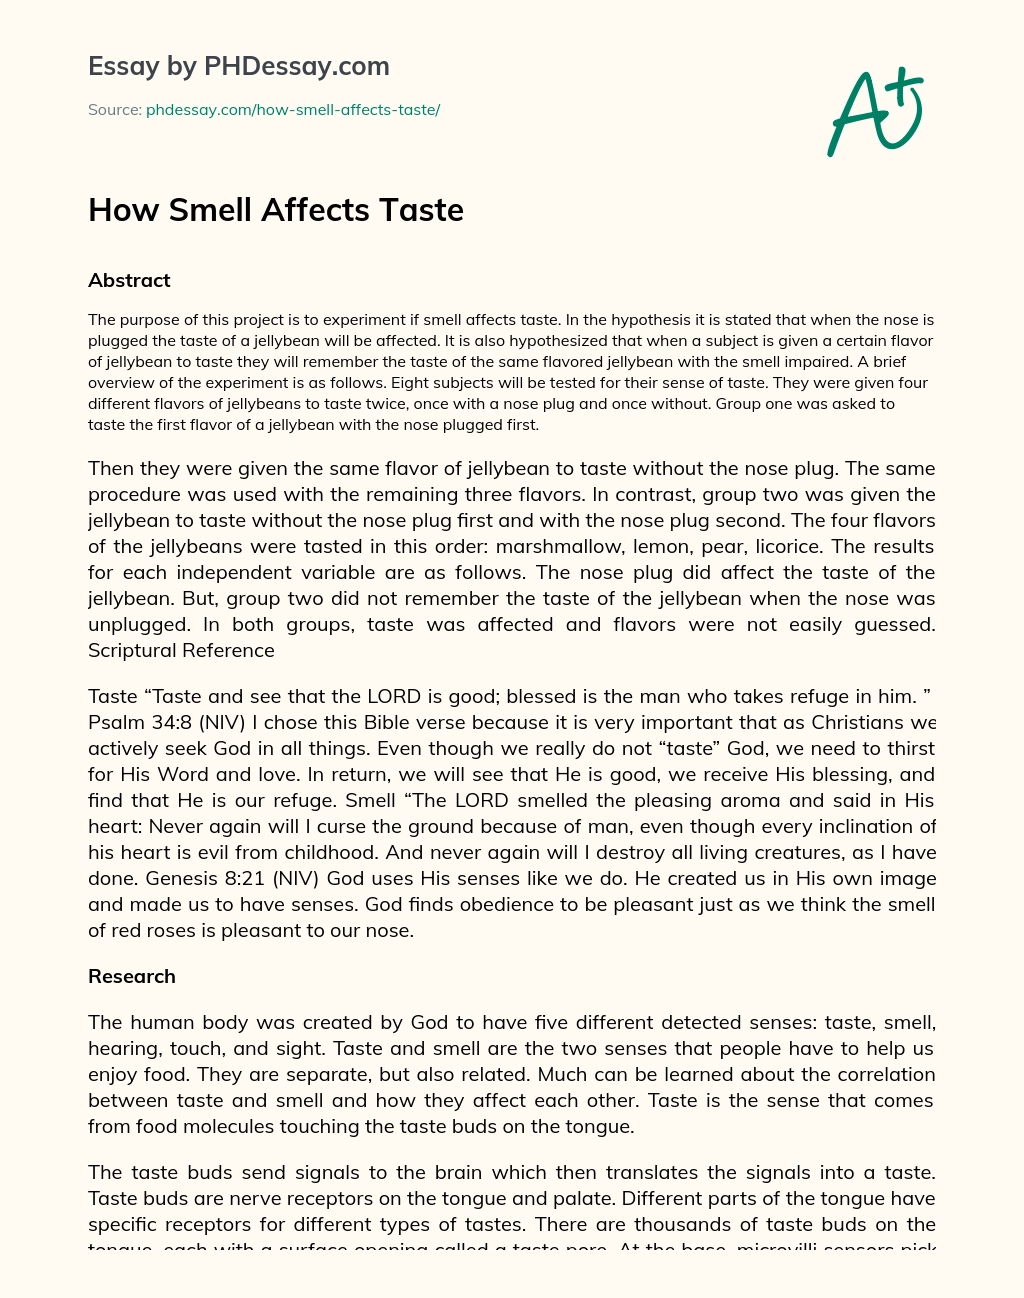 How Smell Affects Taste essay